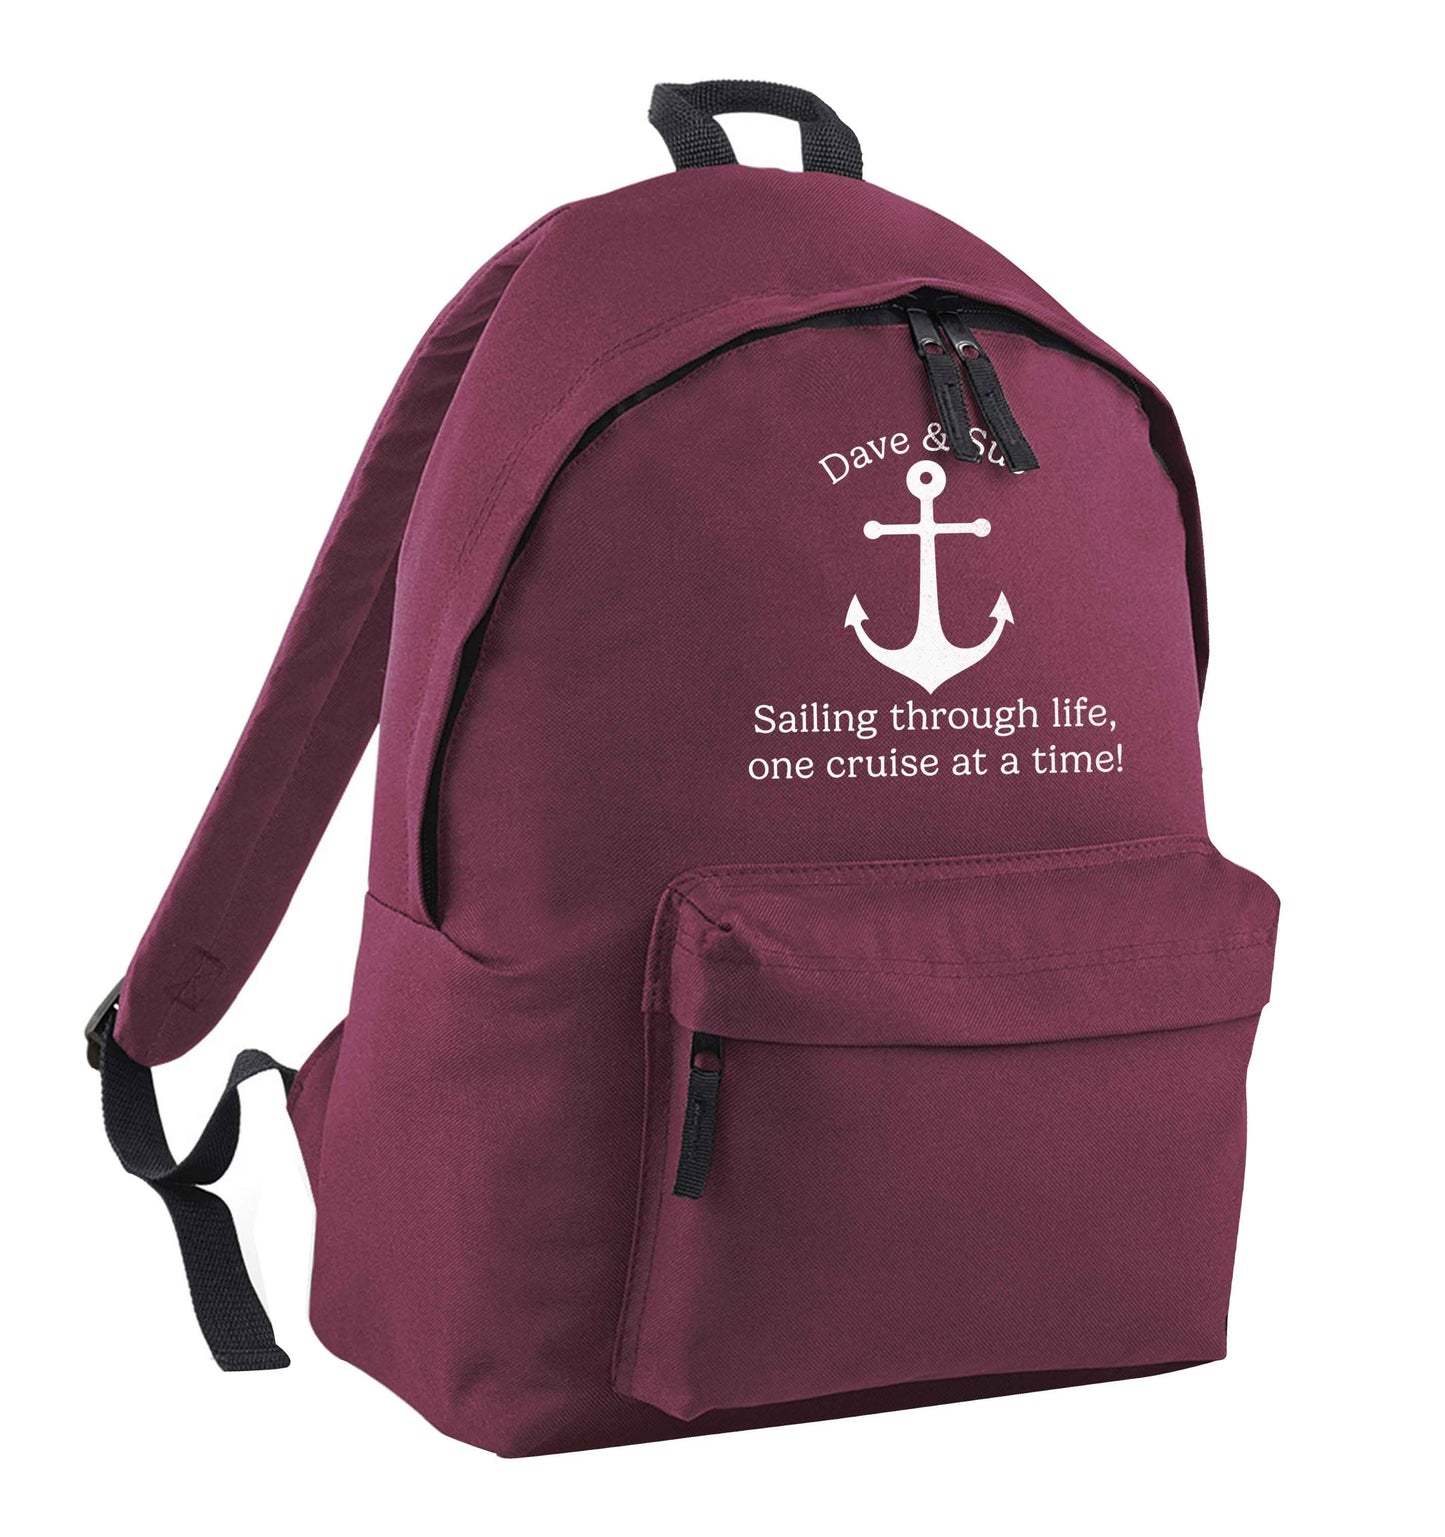 Sailing through life one cruise at a time - personalised maroon adults backpack